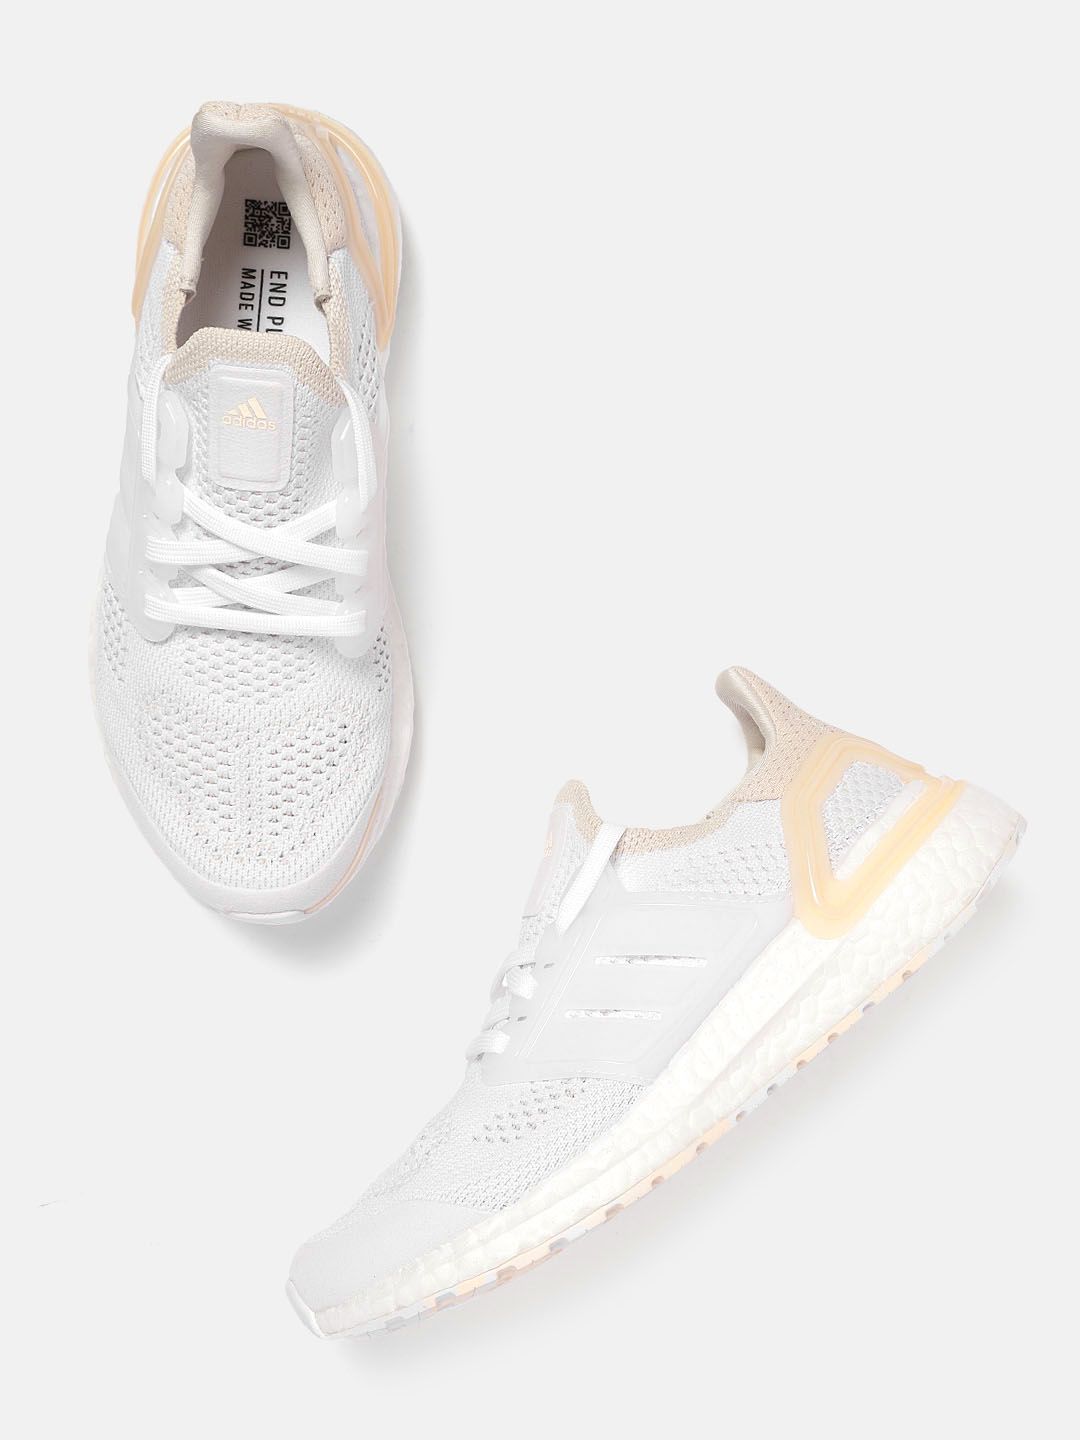 ADIDAS Women White & Cream Woven Design Textile Ultraboost 19.5 DNA Running Shoes Price in India